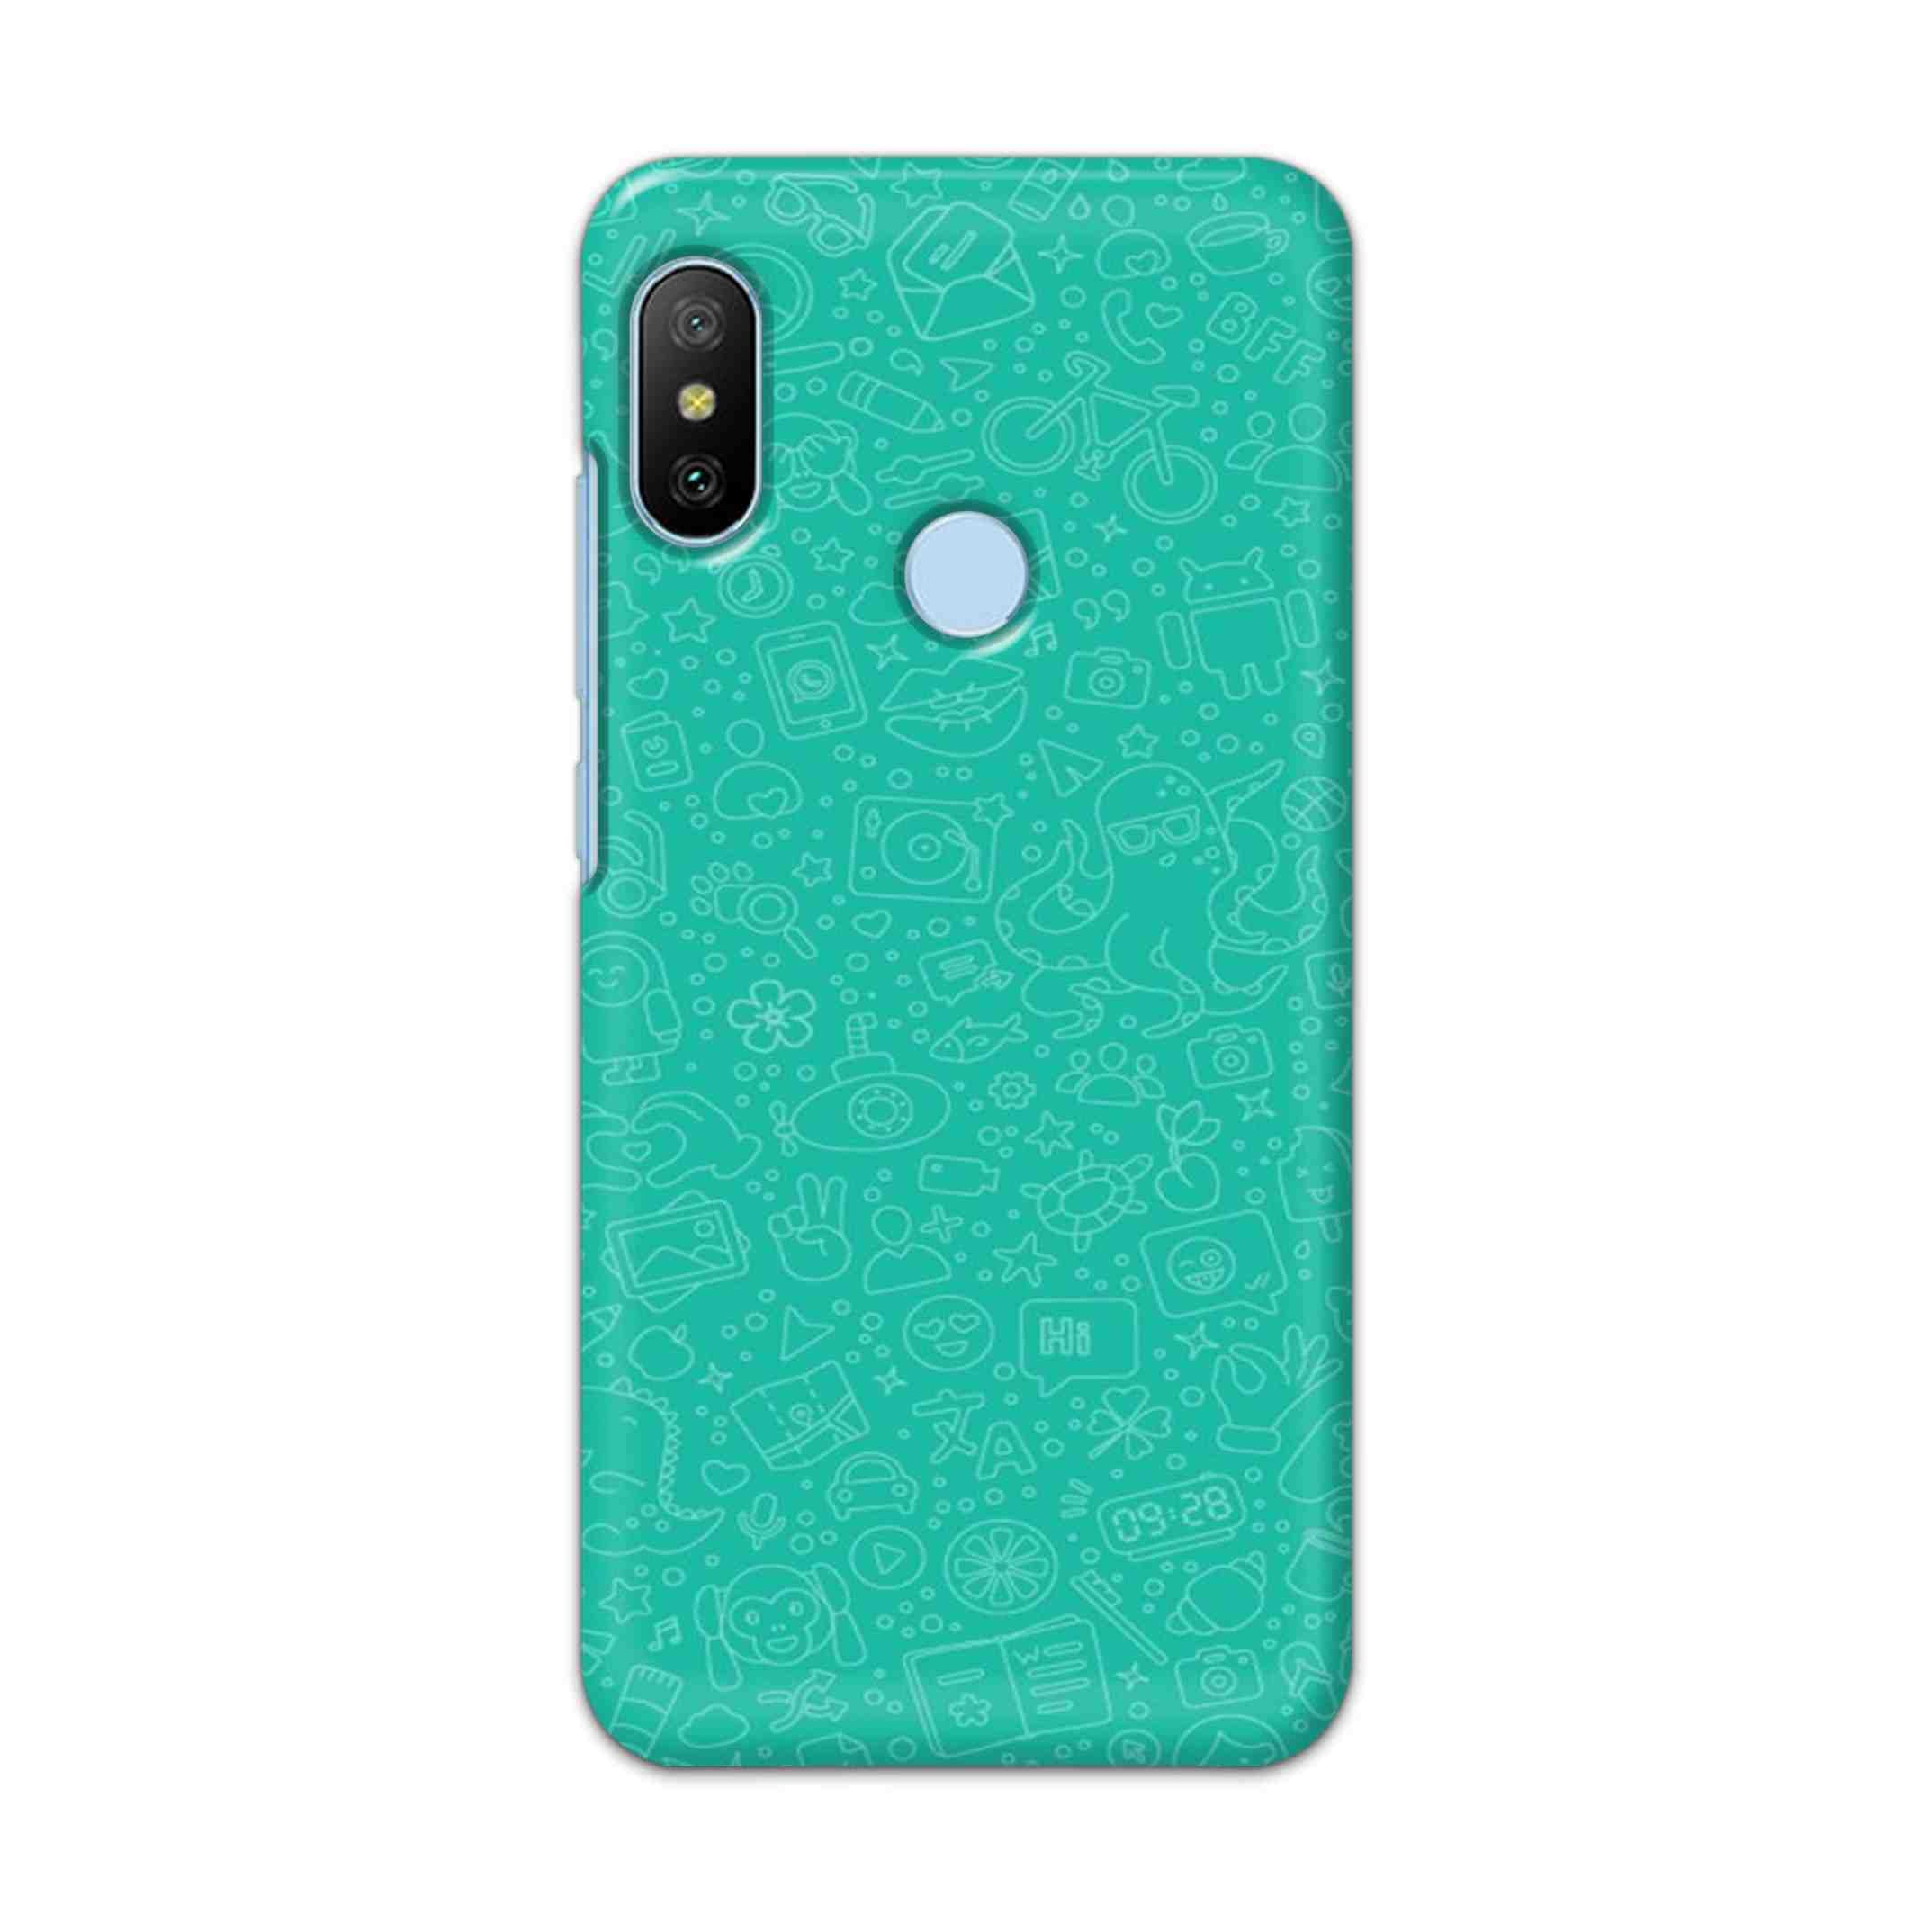 Buy Whatsapp Hard Back Mobile Phone Case/Cover For Xiaomi Redmi 6 Pro Online